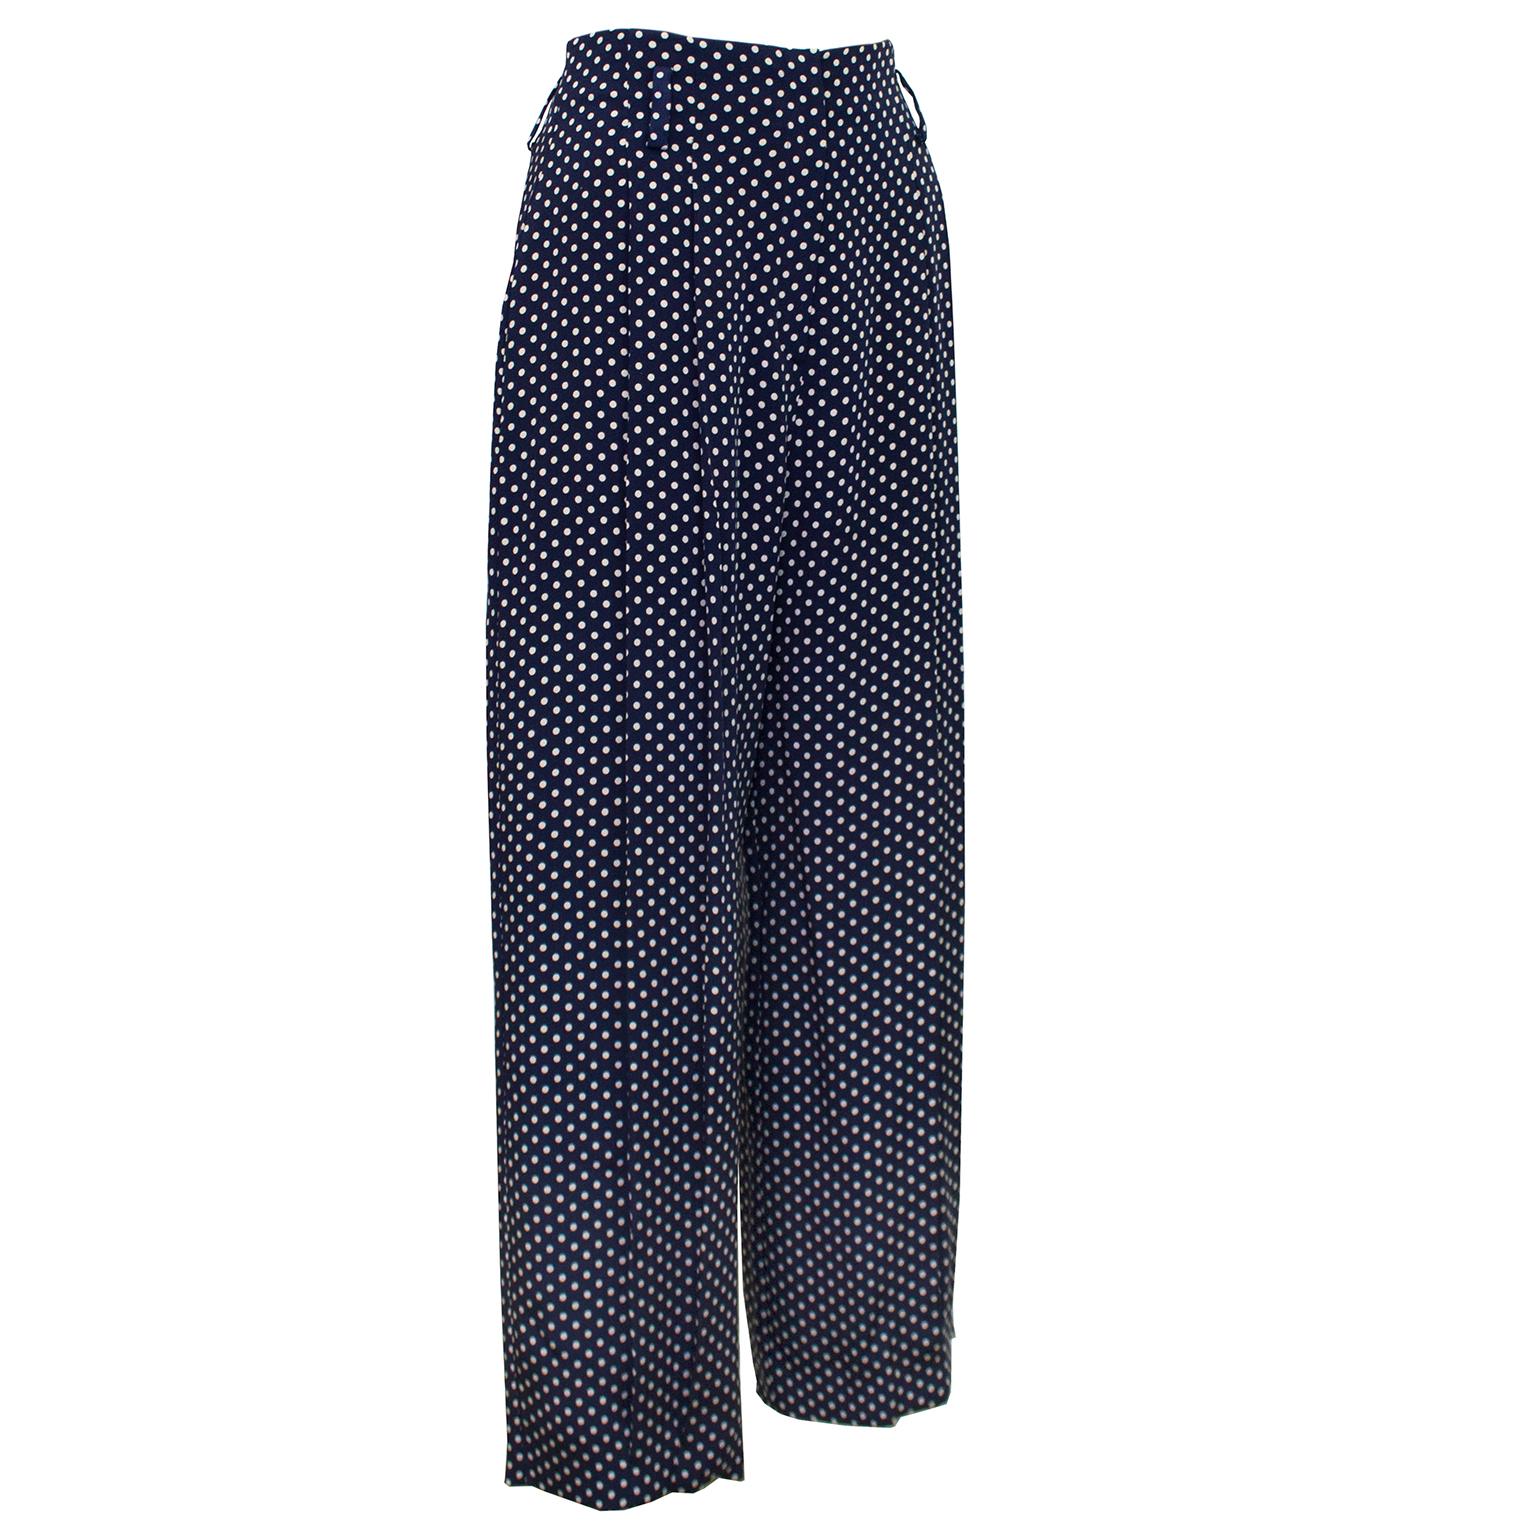 Norma Kamali trousers from the 1980s. Navy blue silk with all over small beige polk dots. High waisted with belt loops and centre front zipper closure with hook and eye. Wide leg with doubled pleated fronts. Unlined. 2